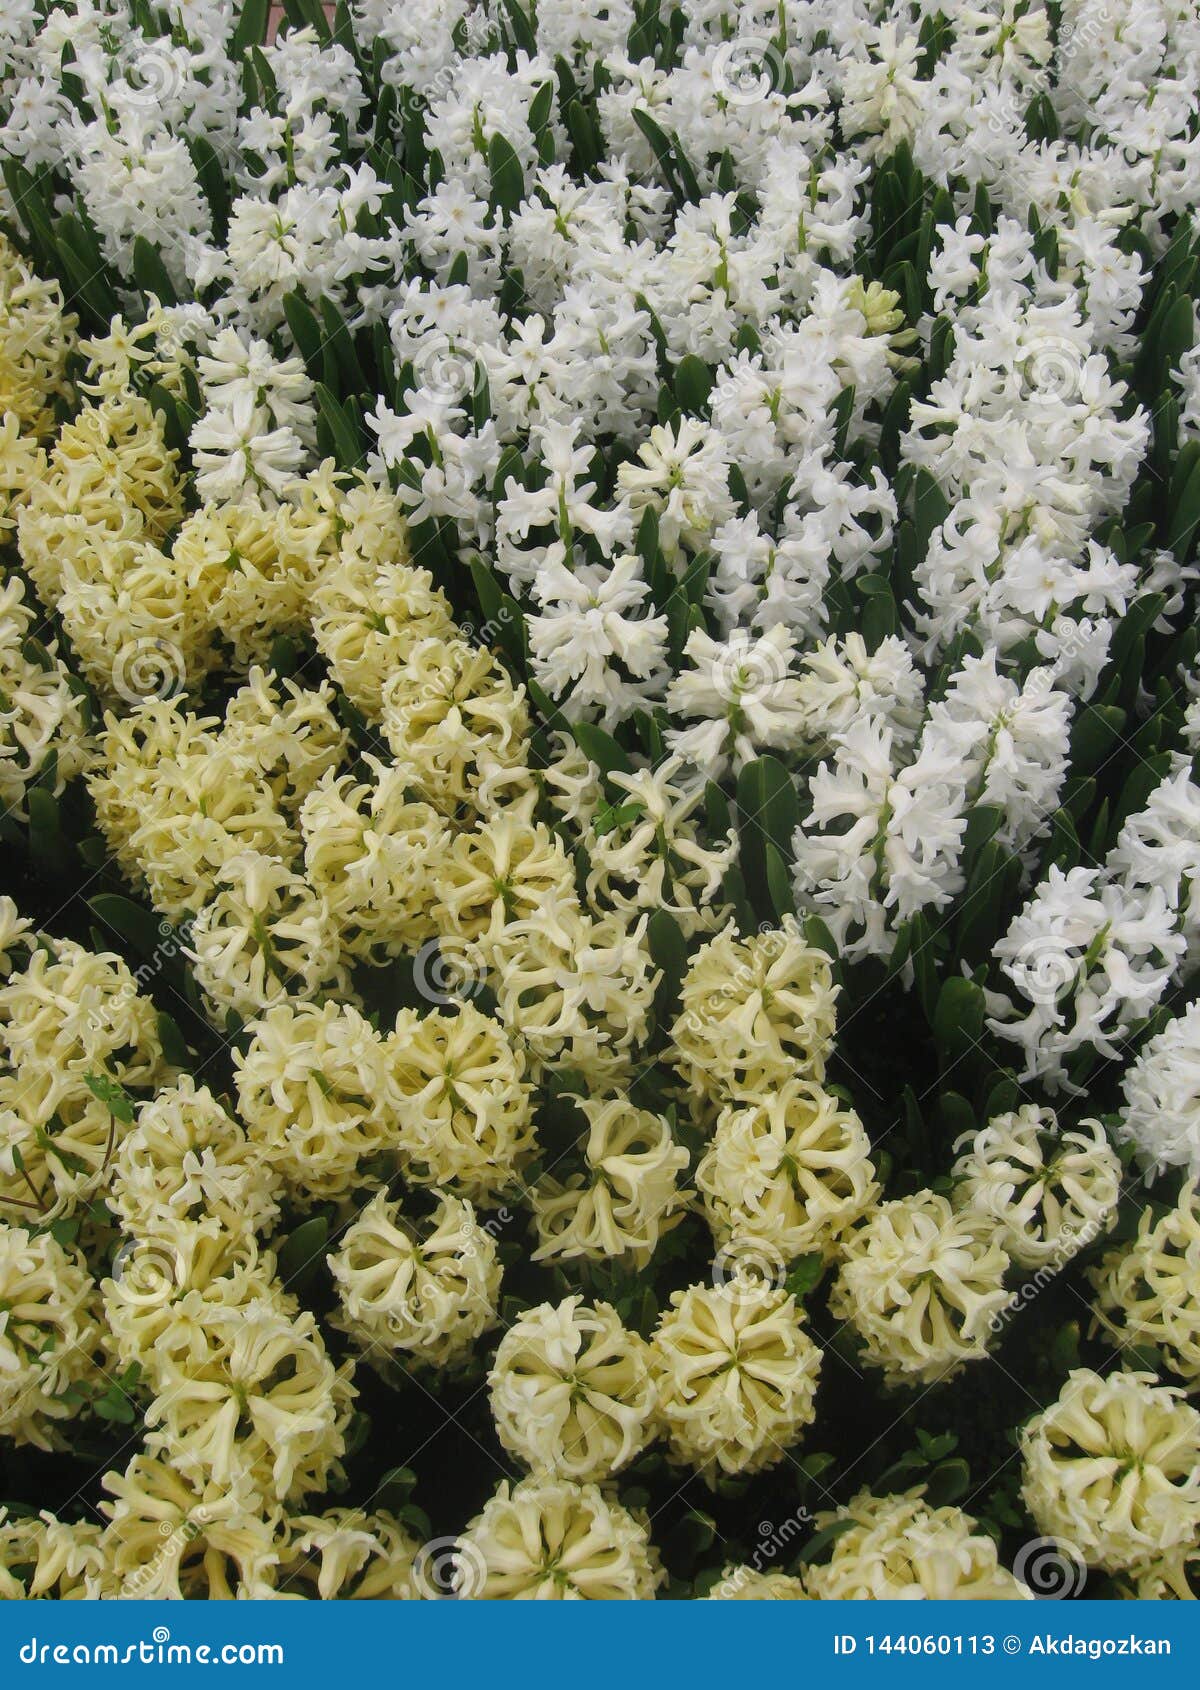 White And Yellow Dutch Hyacinth Hyacinth Blossom From Top View In Spring Stock Image Image Of Summer Petal 144060113